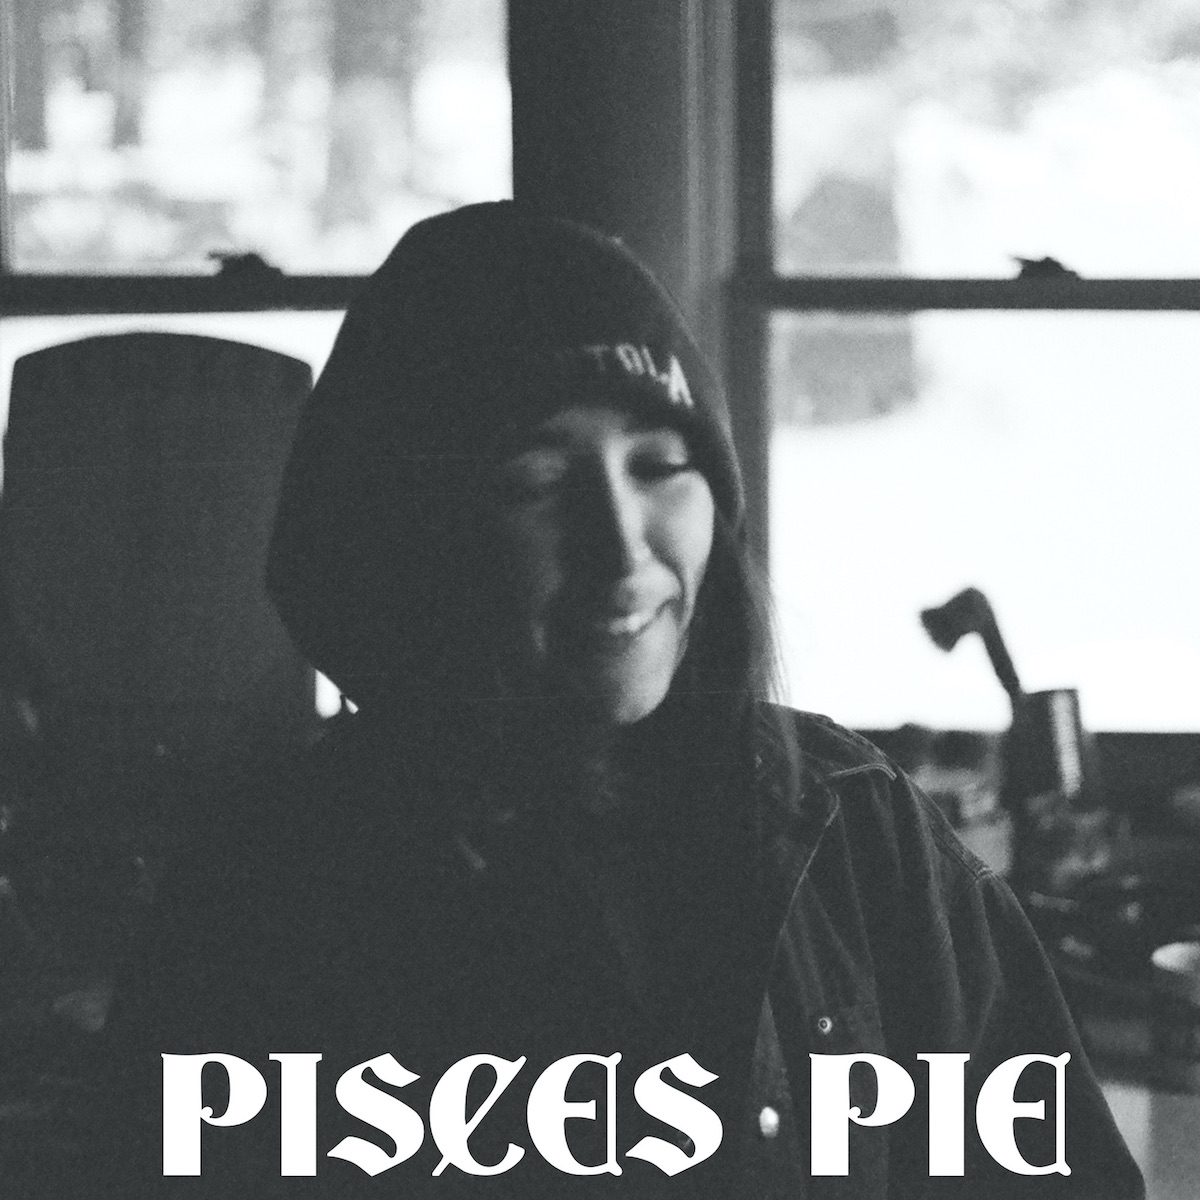 ALBUM REVIEW: Pisces Pie by Odelet